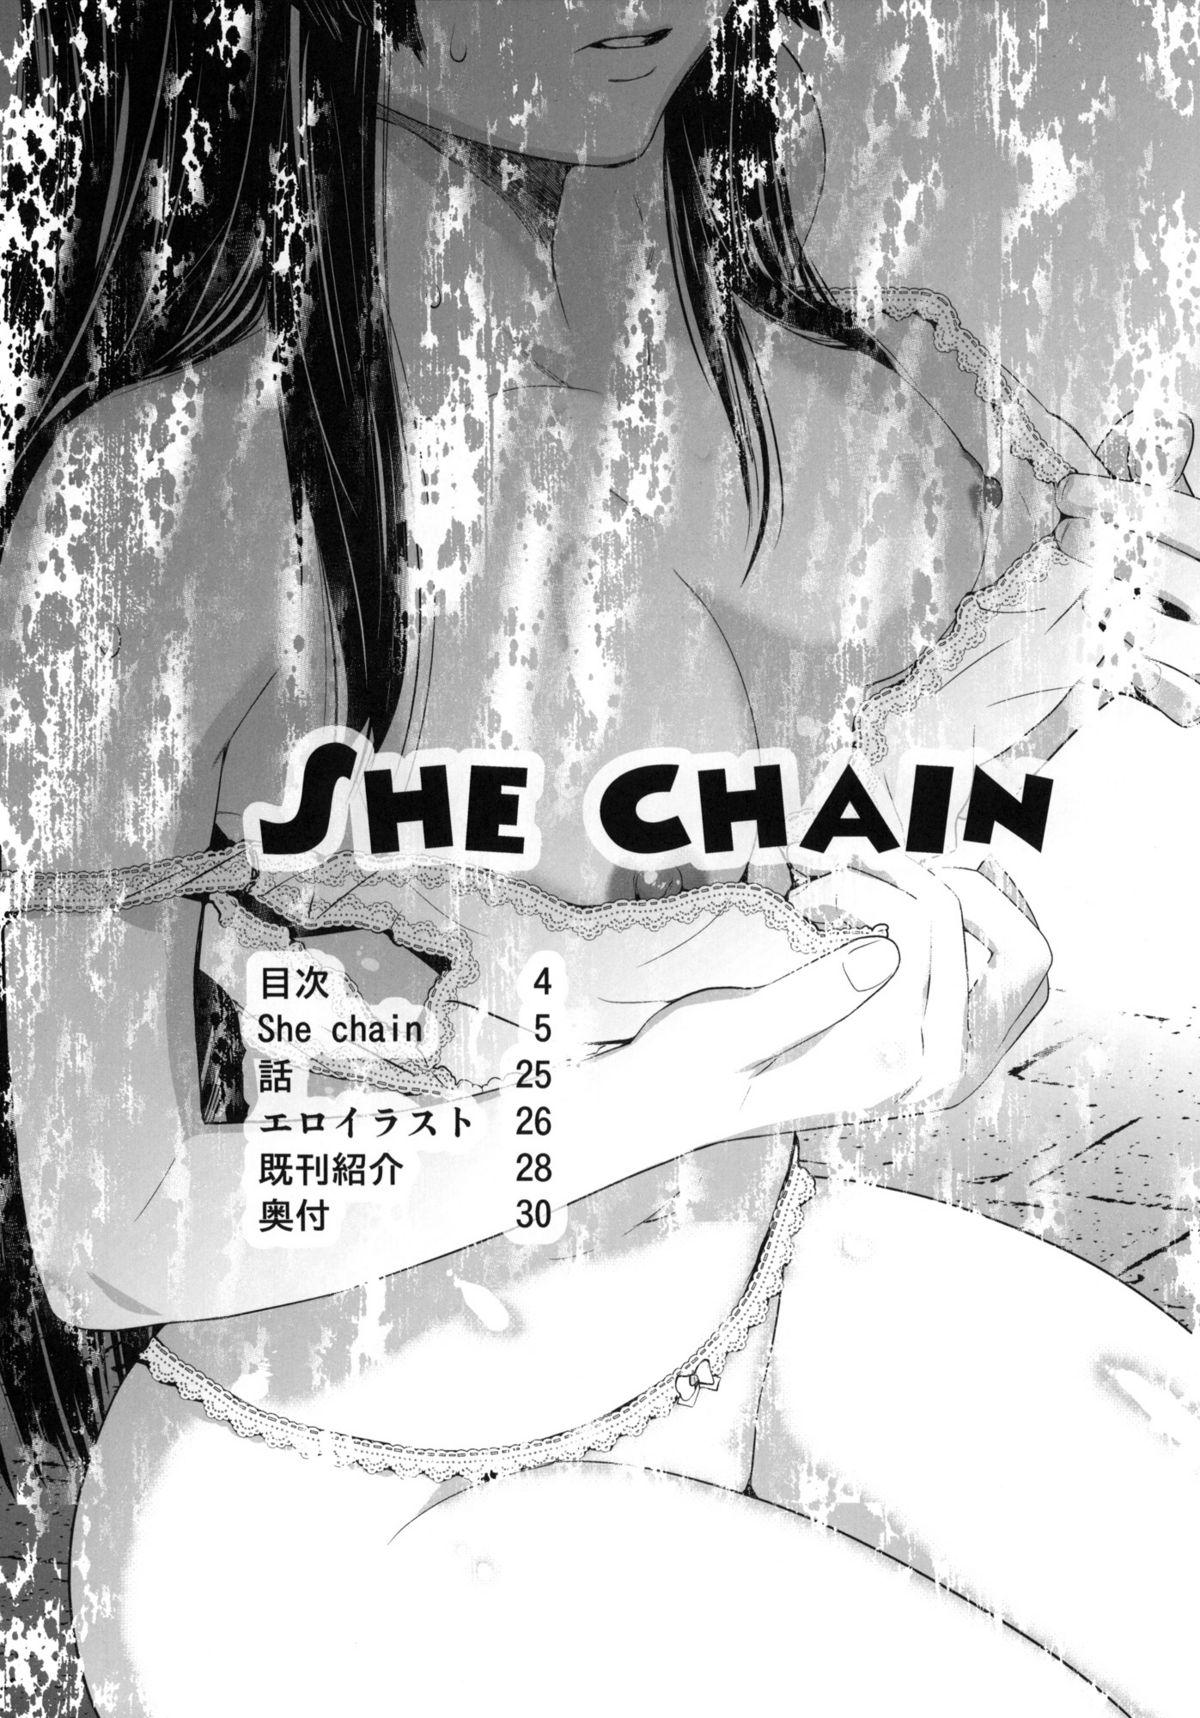 Hot She Chain - K on Free Amature - Page 3